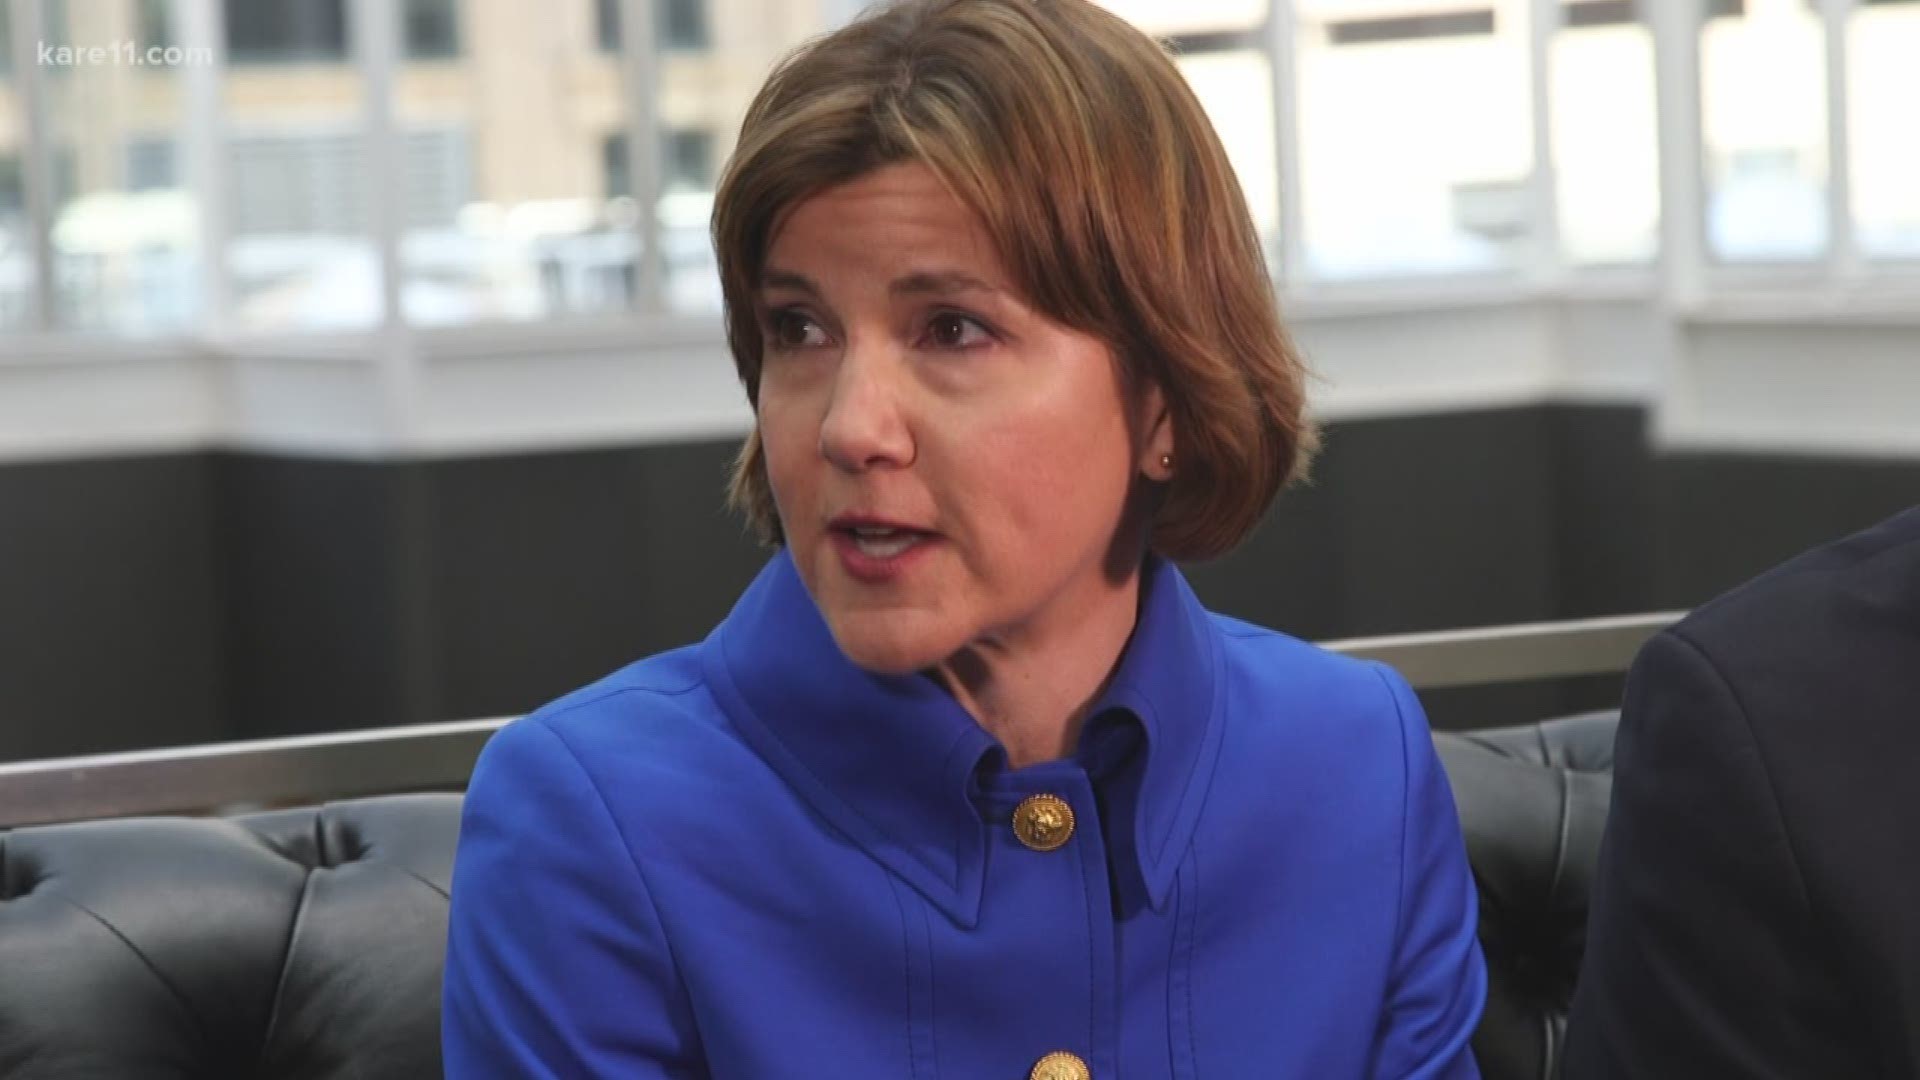 Minnesota Attorney General Lori Swanson is getting into the state's crowded race for governor, with Rep. Rick Nolan as her running mate. https://kare11.tv/2Lnkw9I